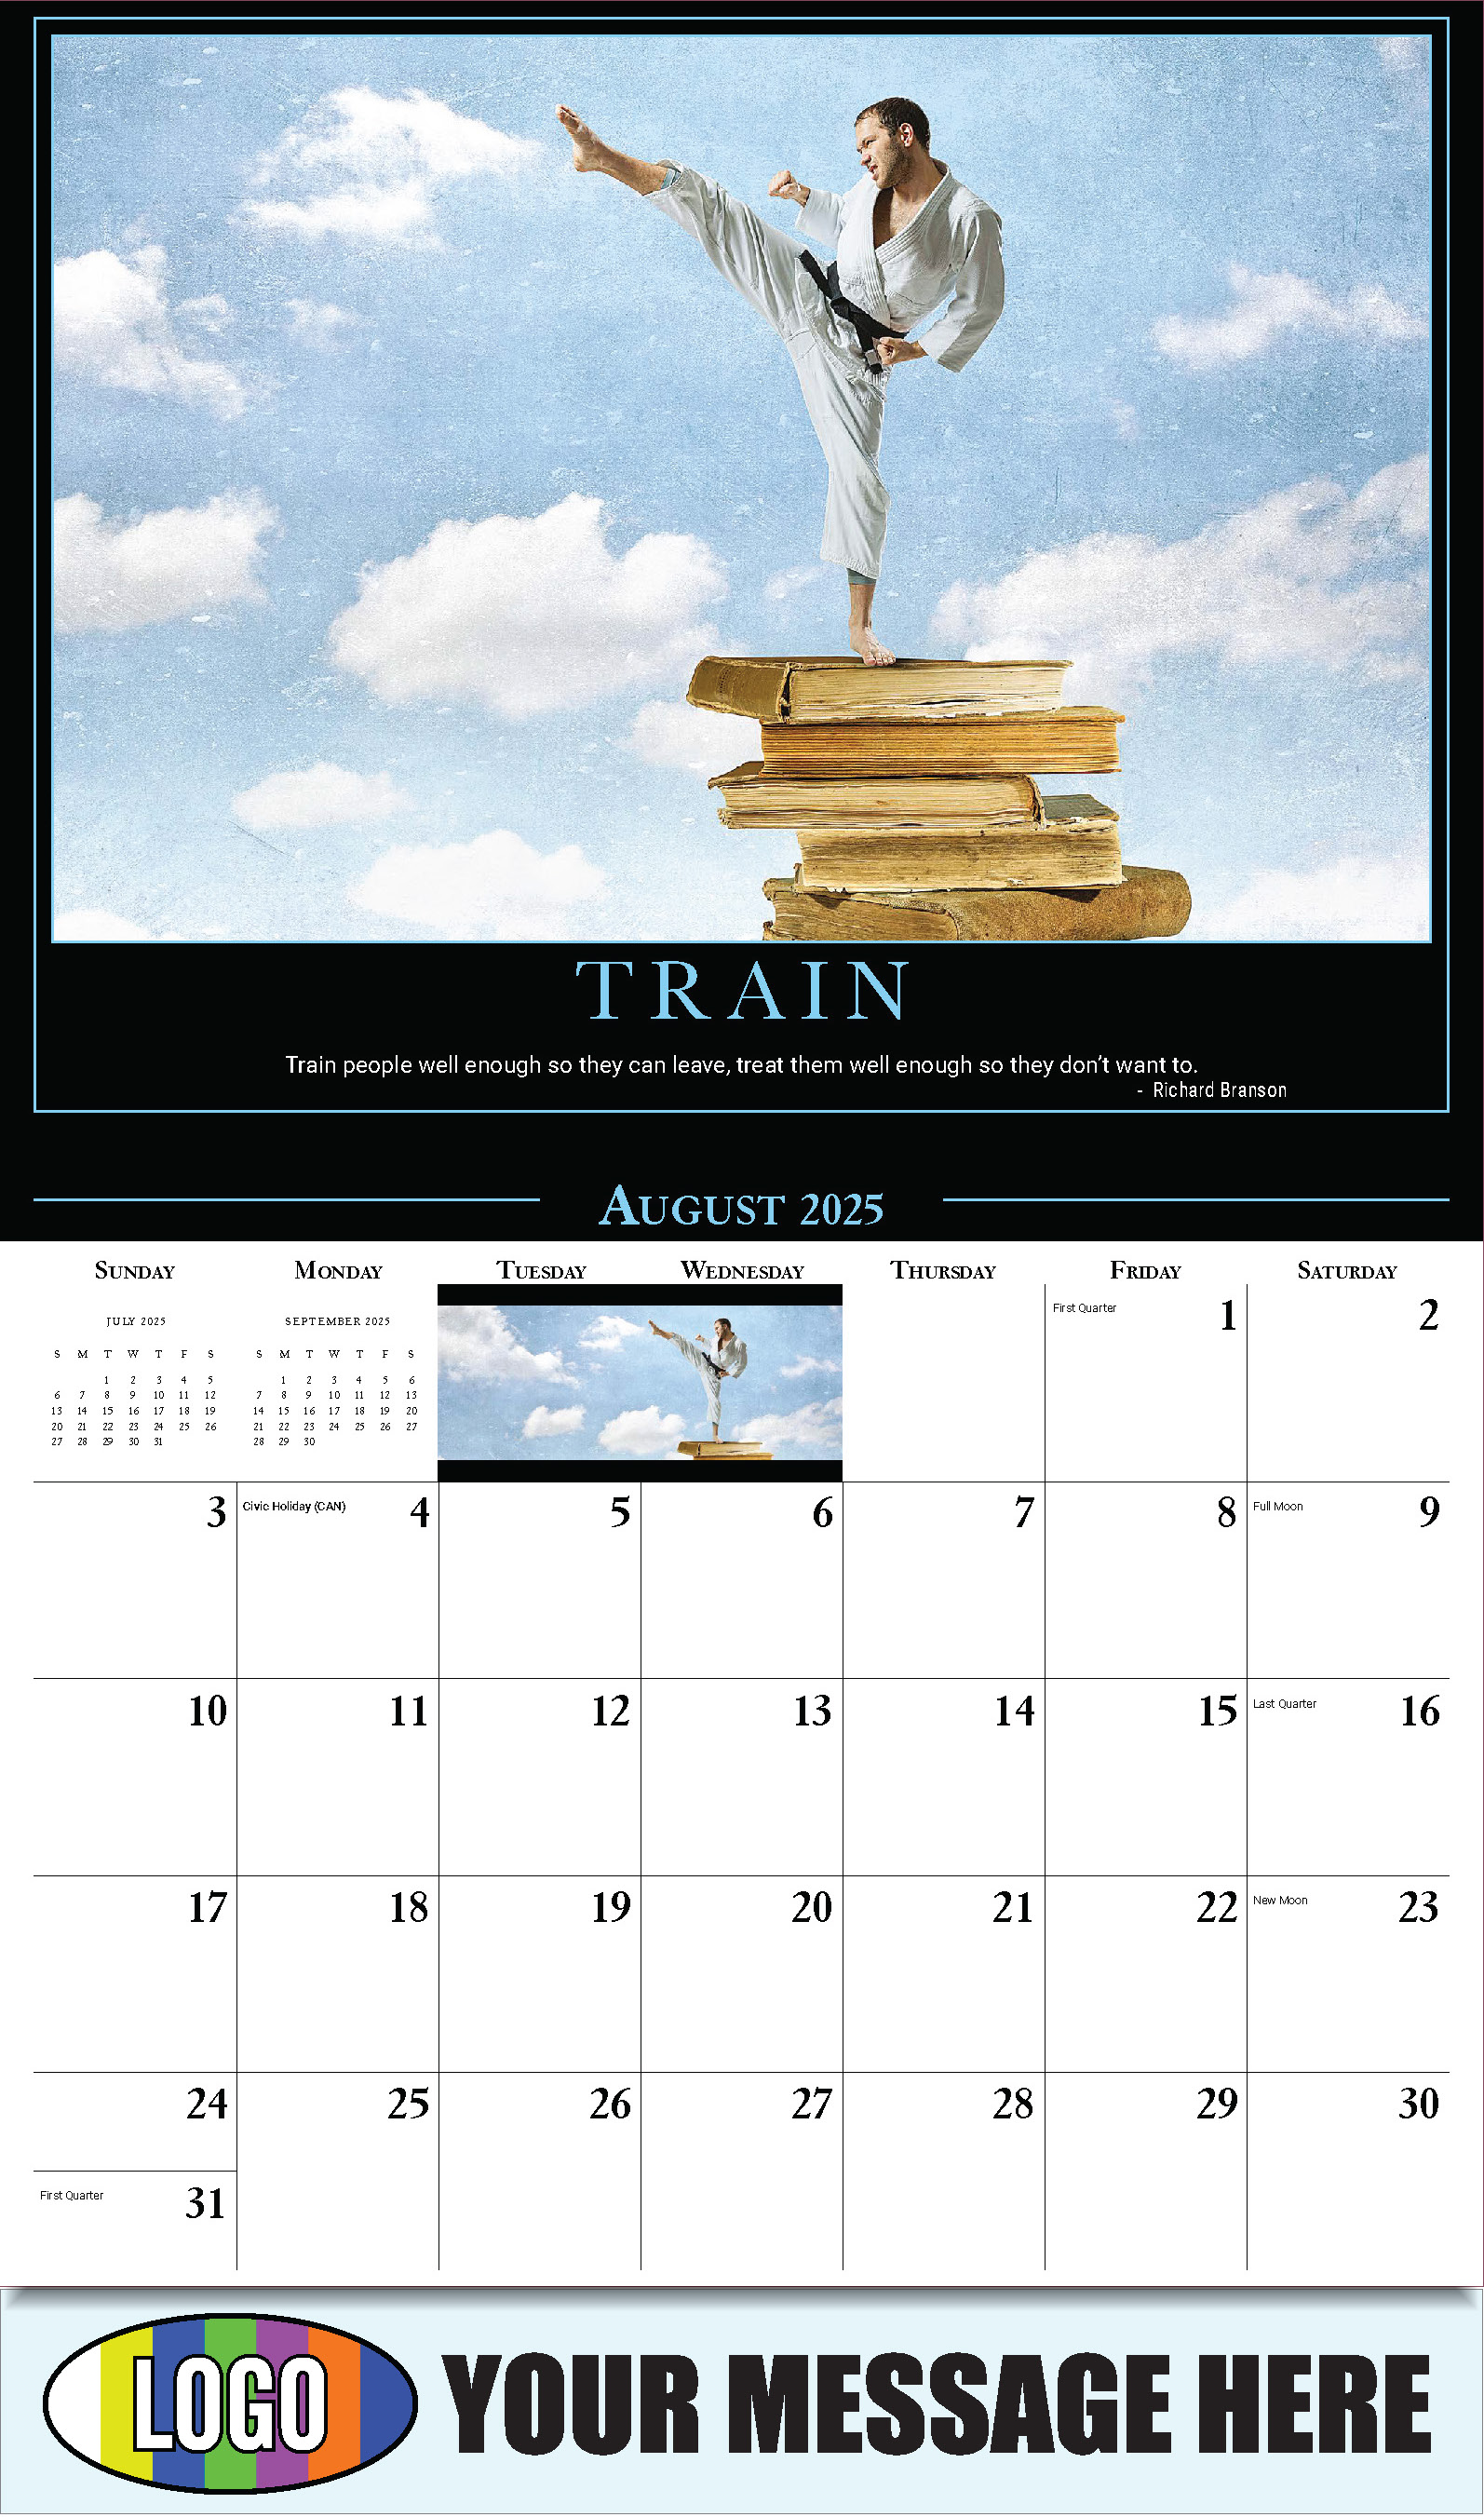 Motivational Quotes 2025 Business Promo Wall Calendar - August